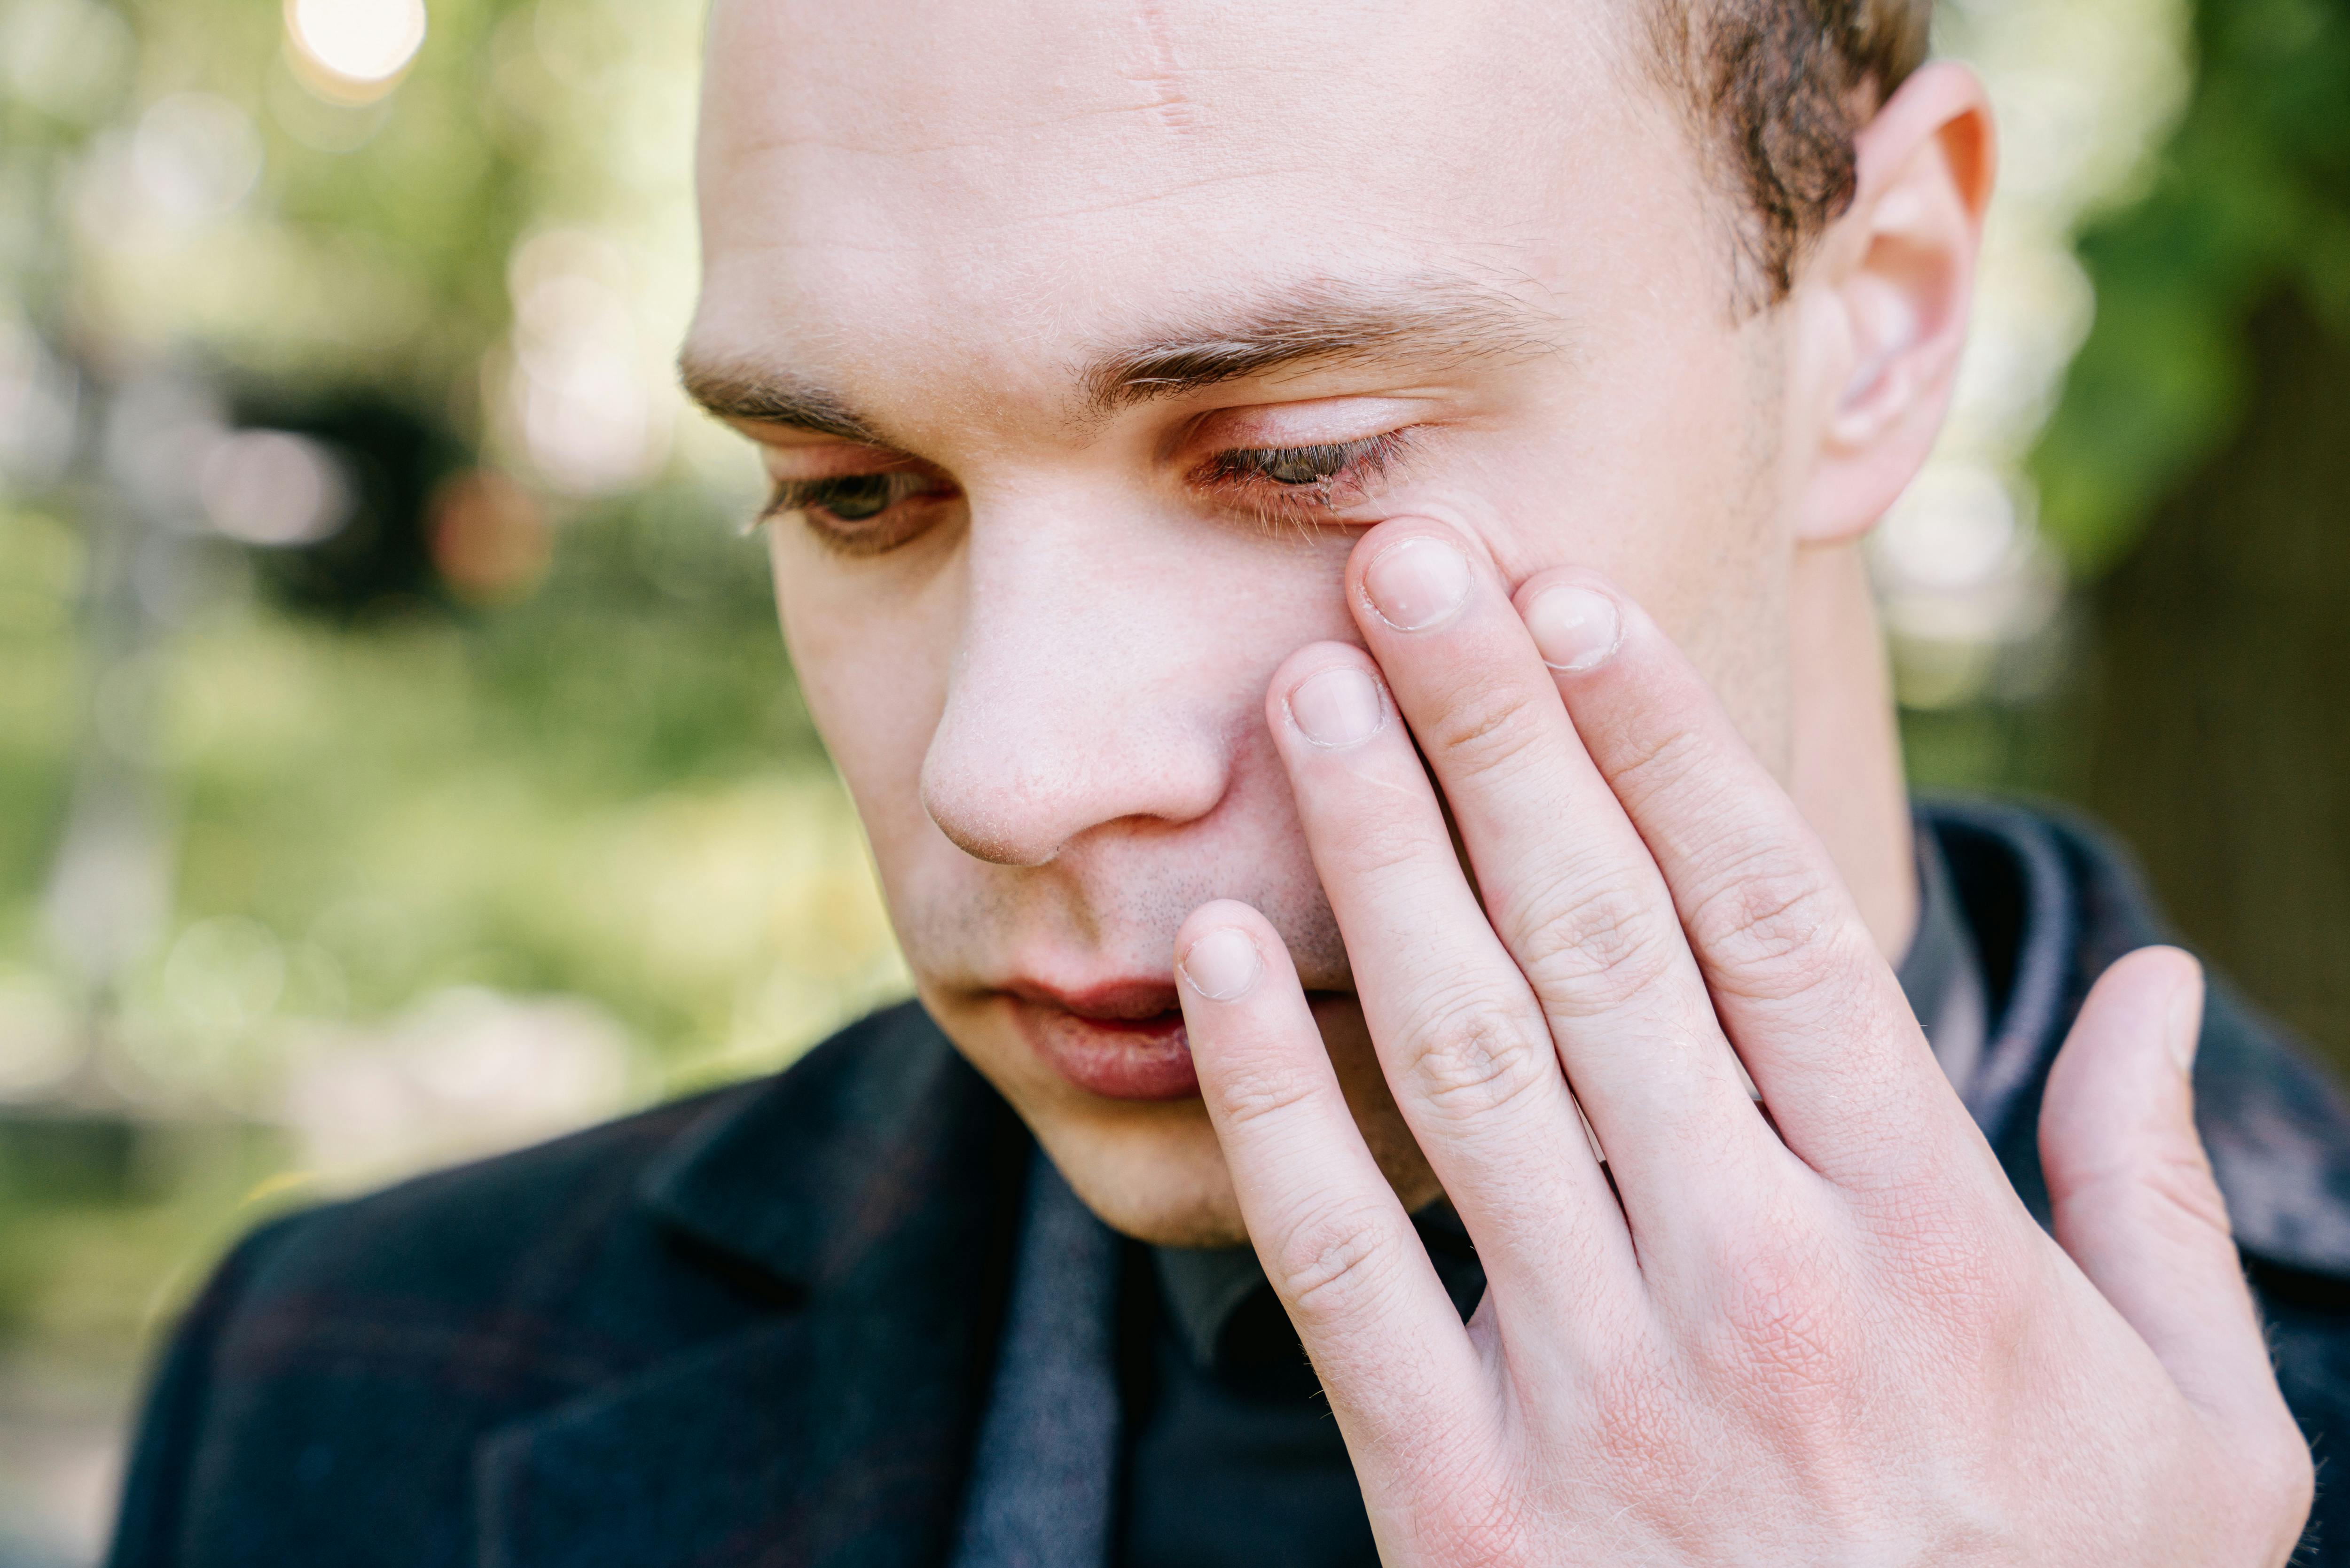 A sad young man wiping tears from his eyes | Source: Pexels